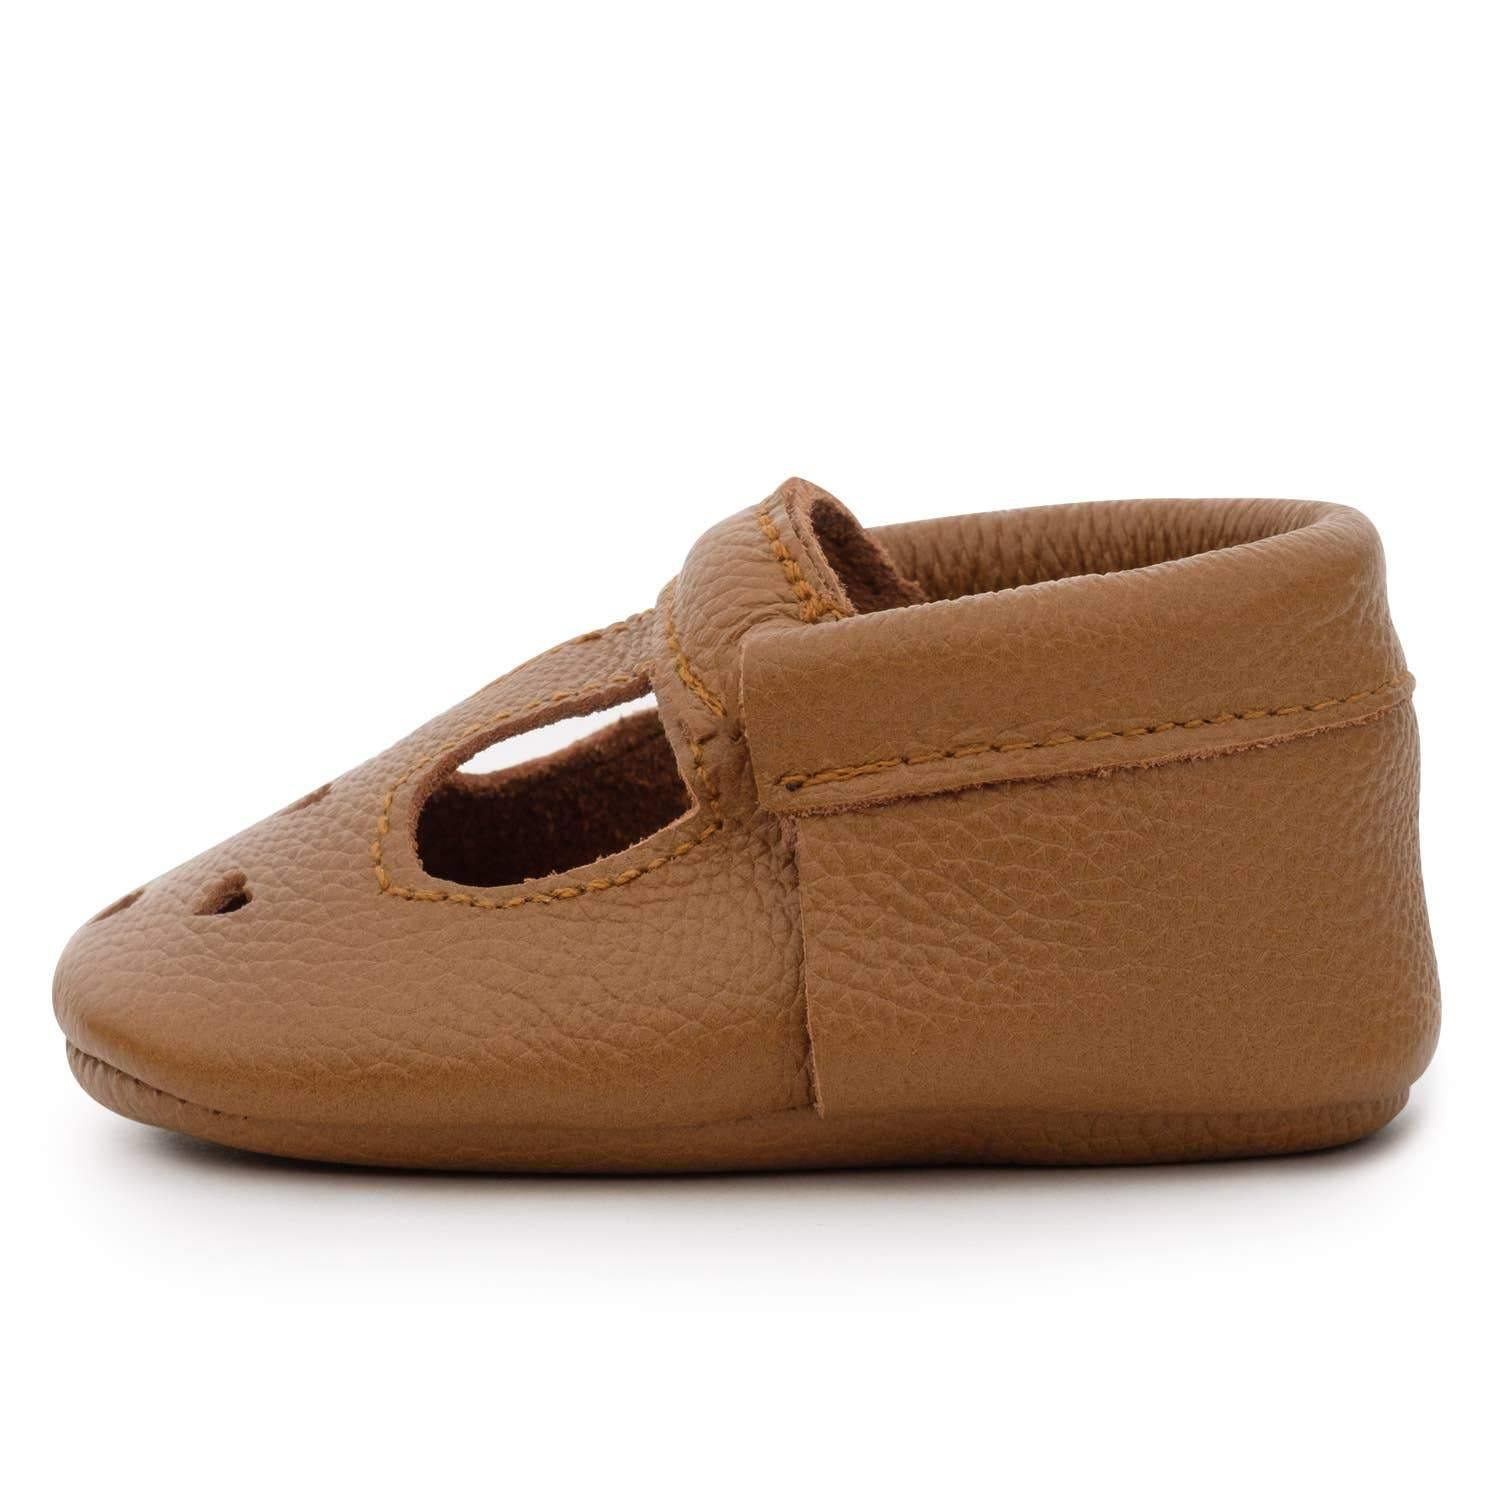 BirdRock Baby Mary Janes - Classic Brown - ECOBUNS BABY + CO.